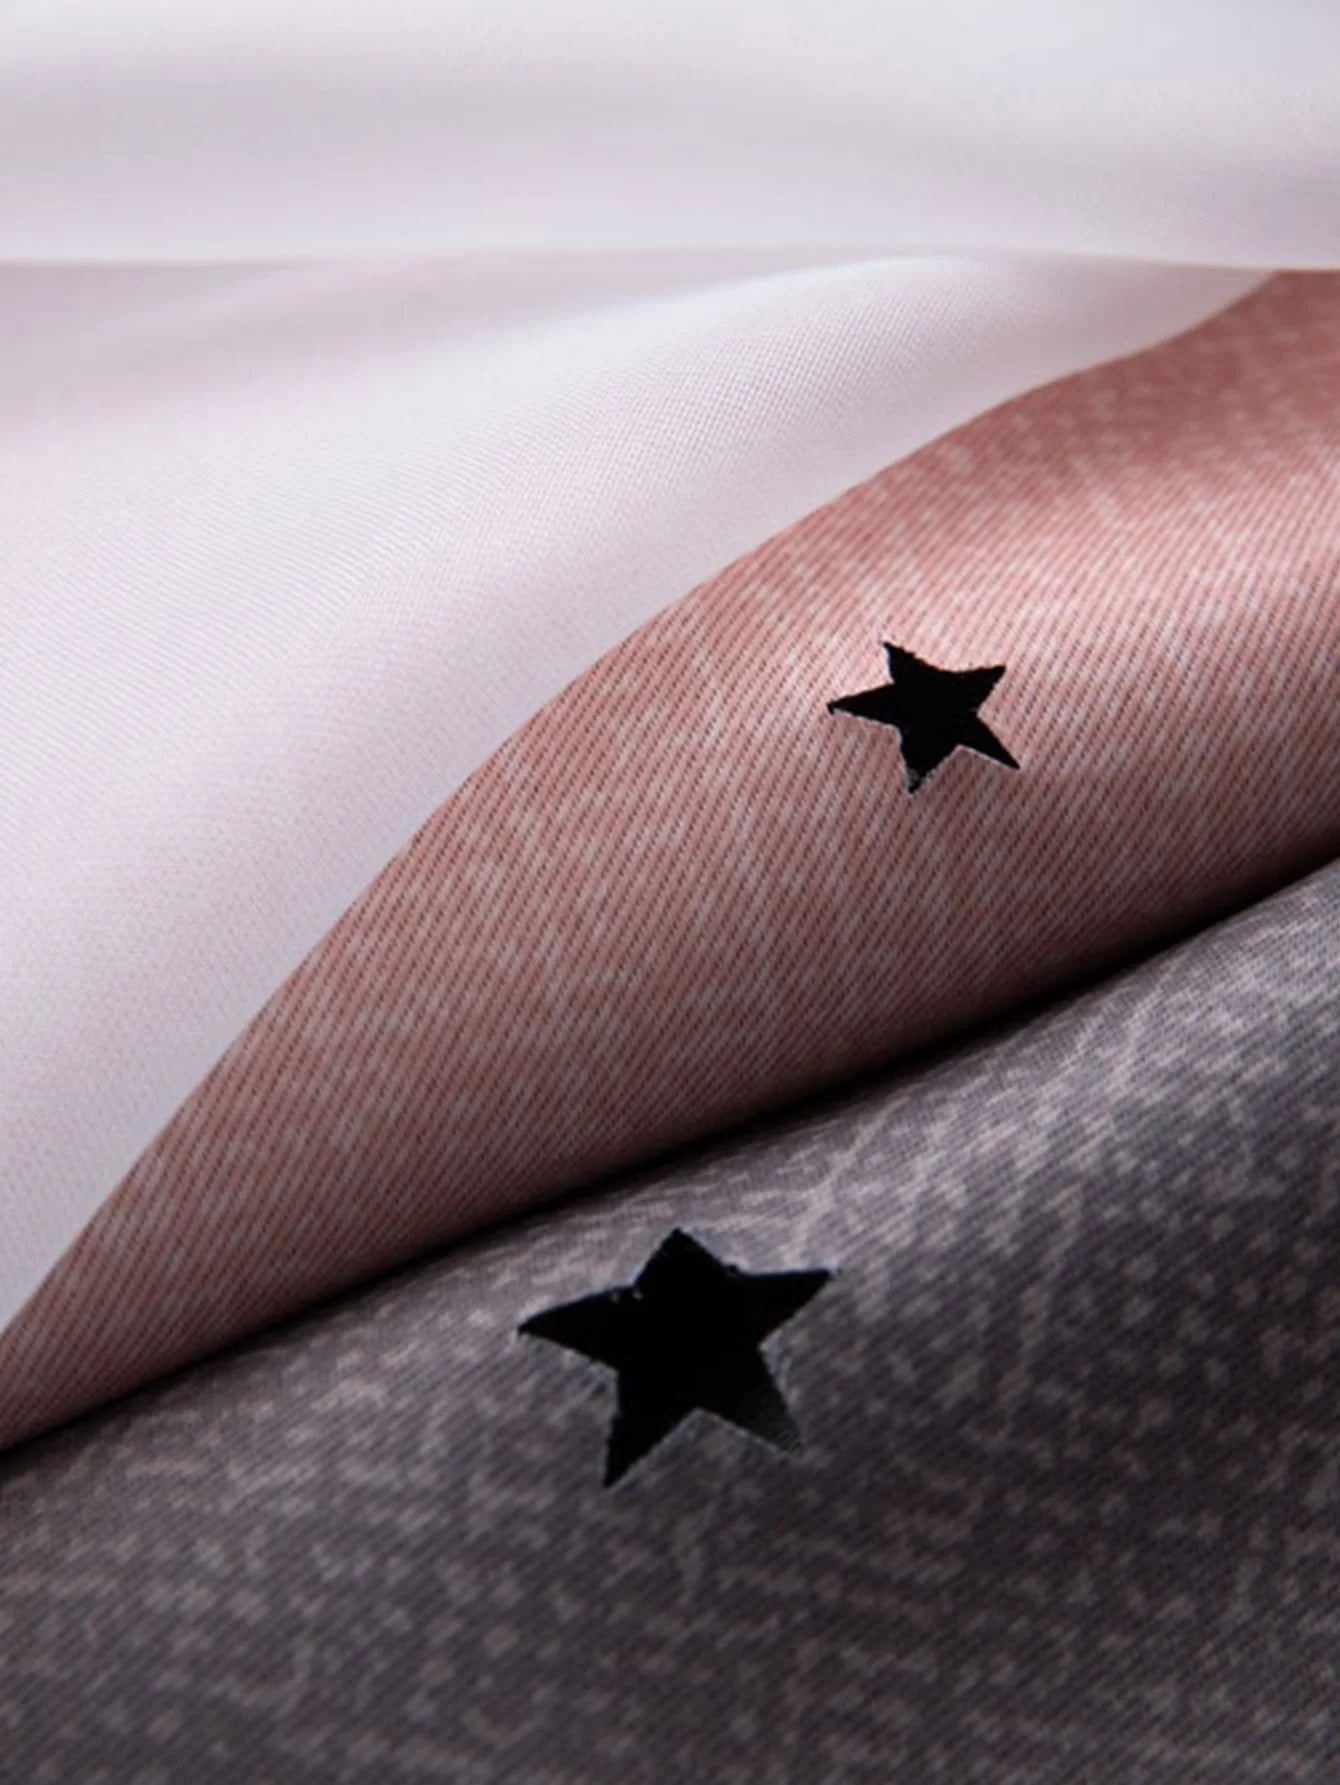 Steven Store™ Silver Twinkle Star Blackout Curtains: Elegant and functional for privacy and comfort